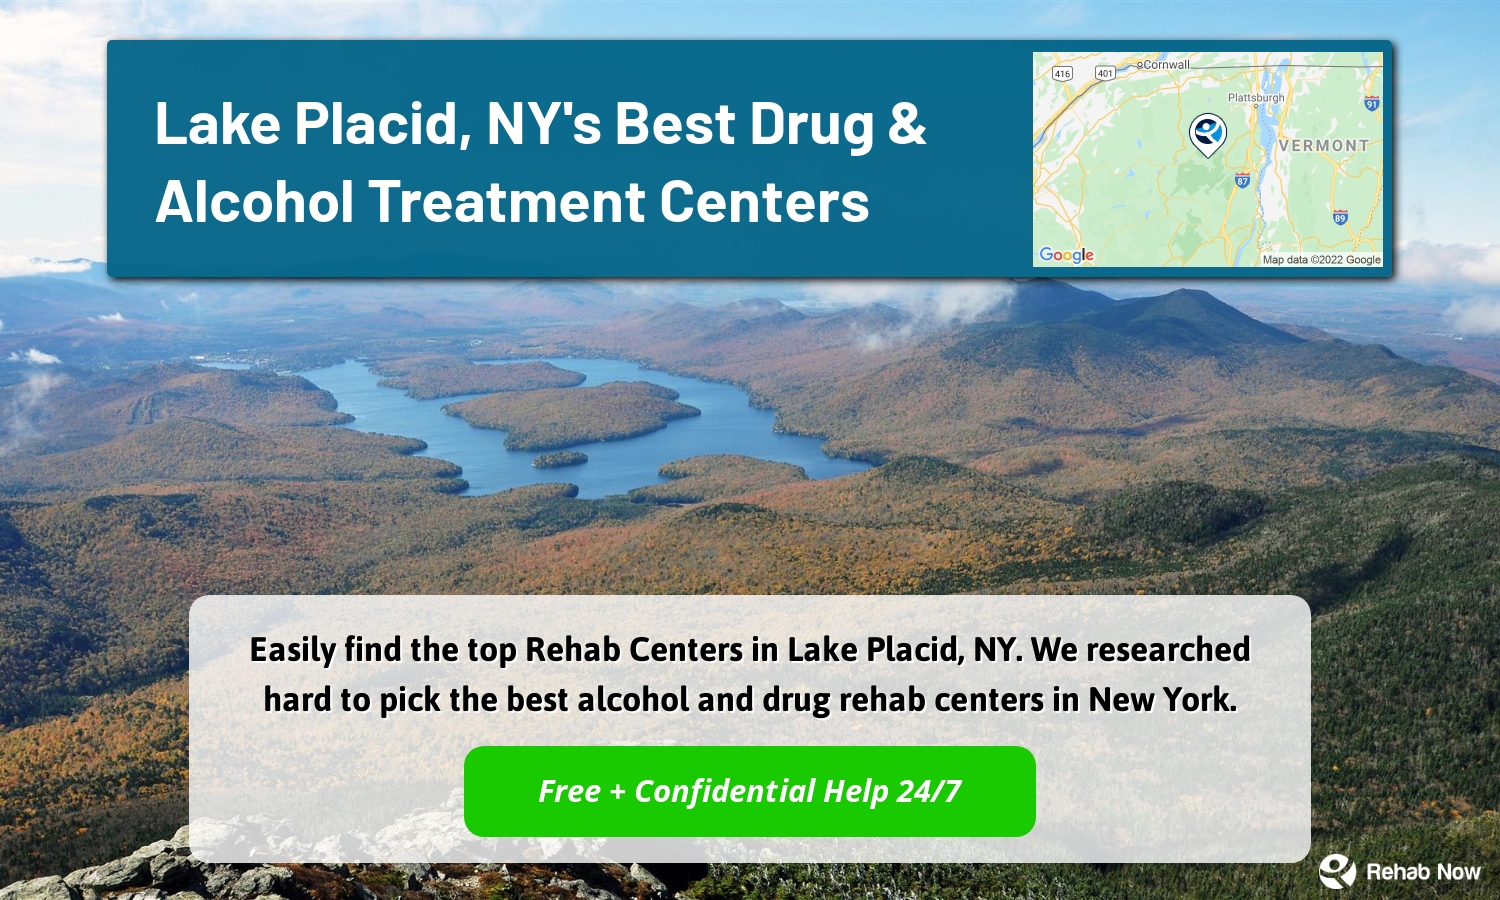 Easily find the top Rehab Centers in Lake Placid, NY. We researched hard to pick the best alcohol and drug rehab centers in New York.